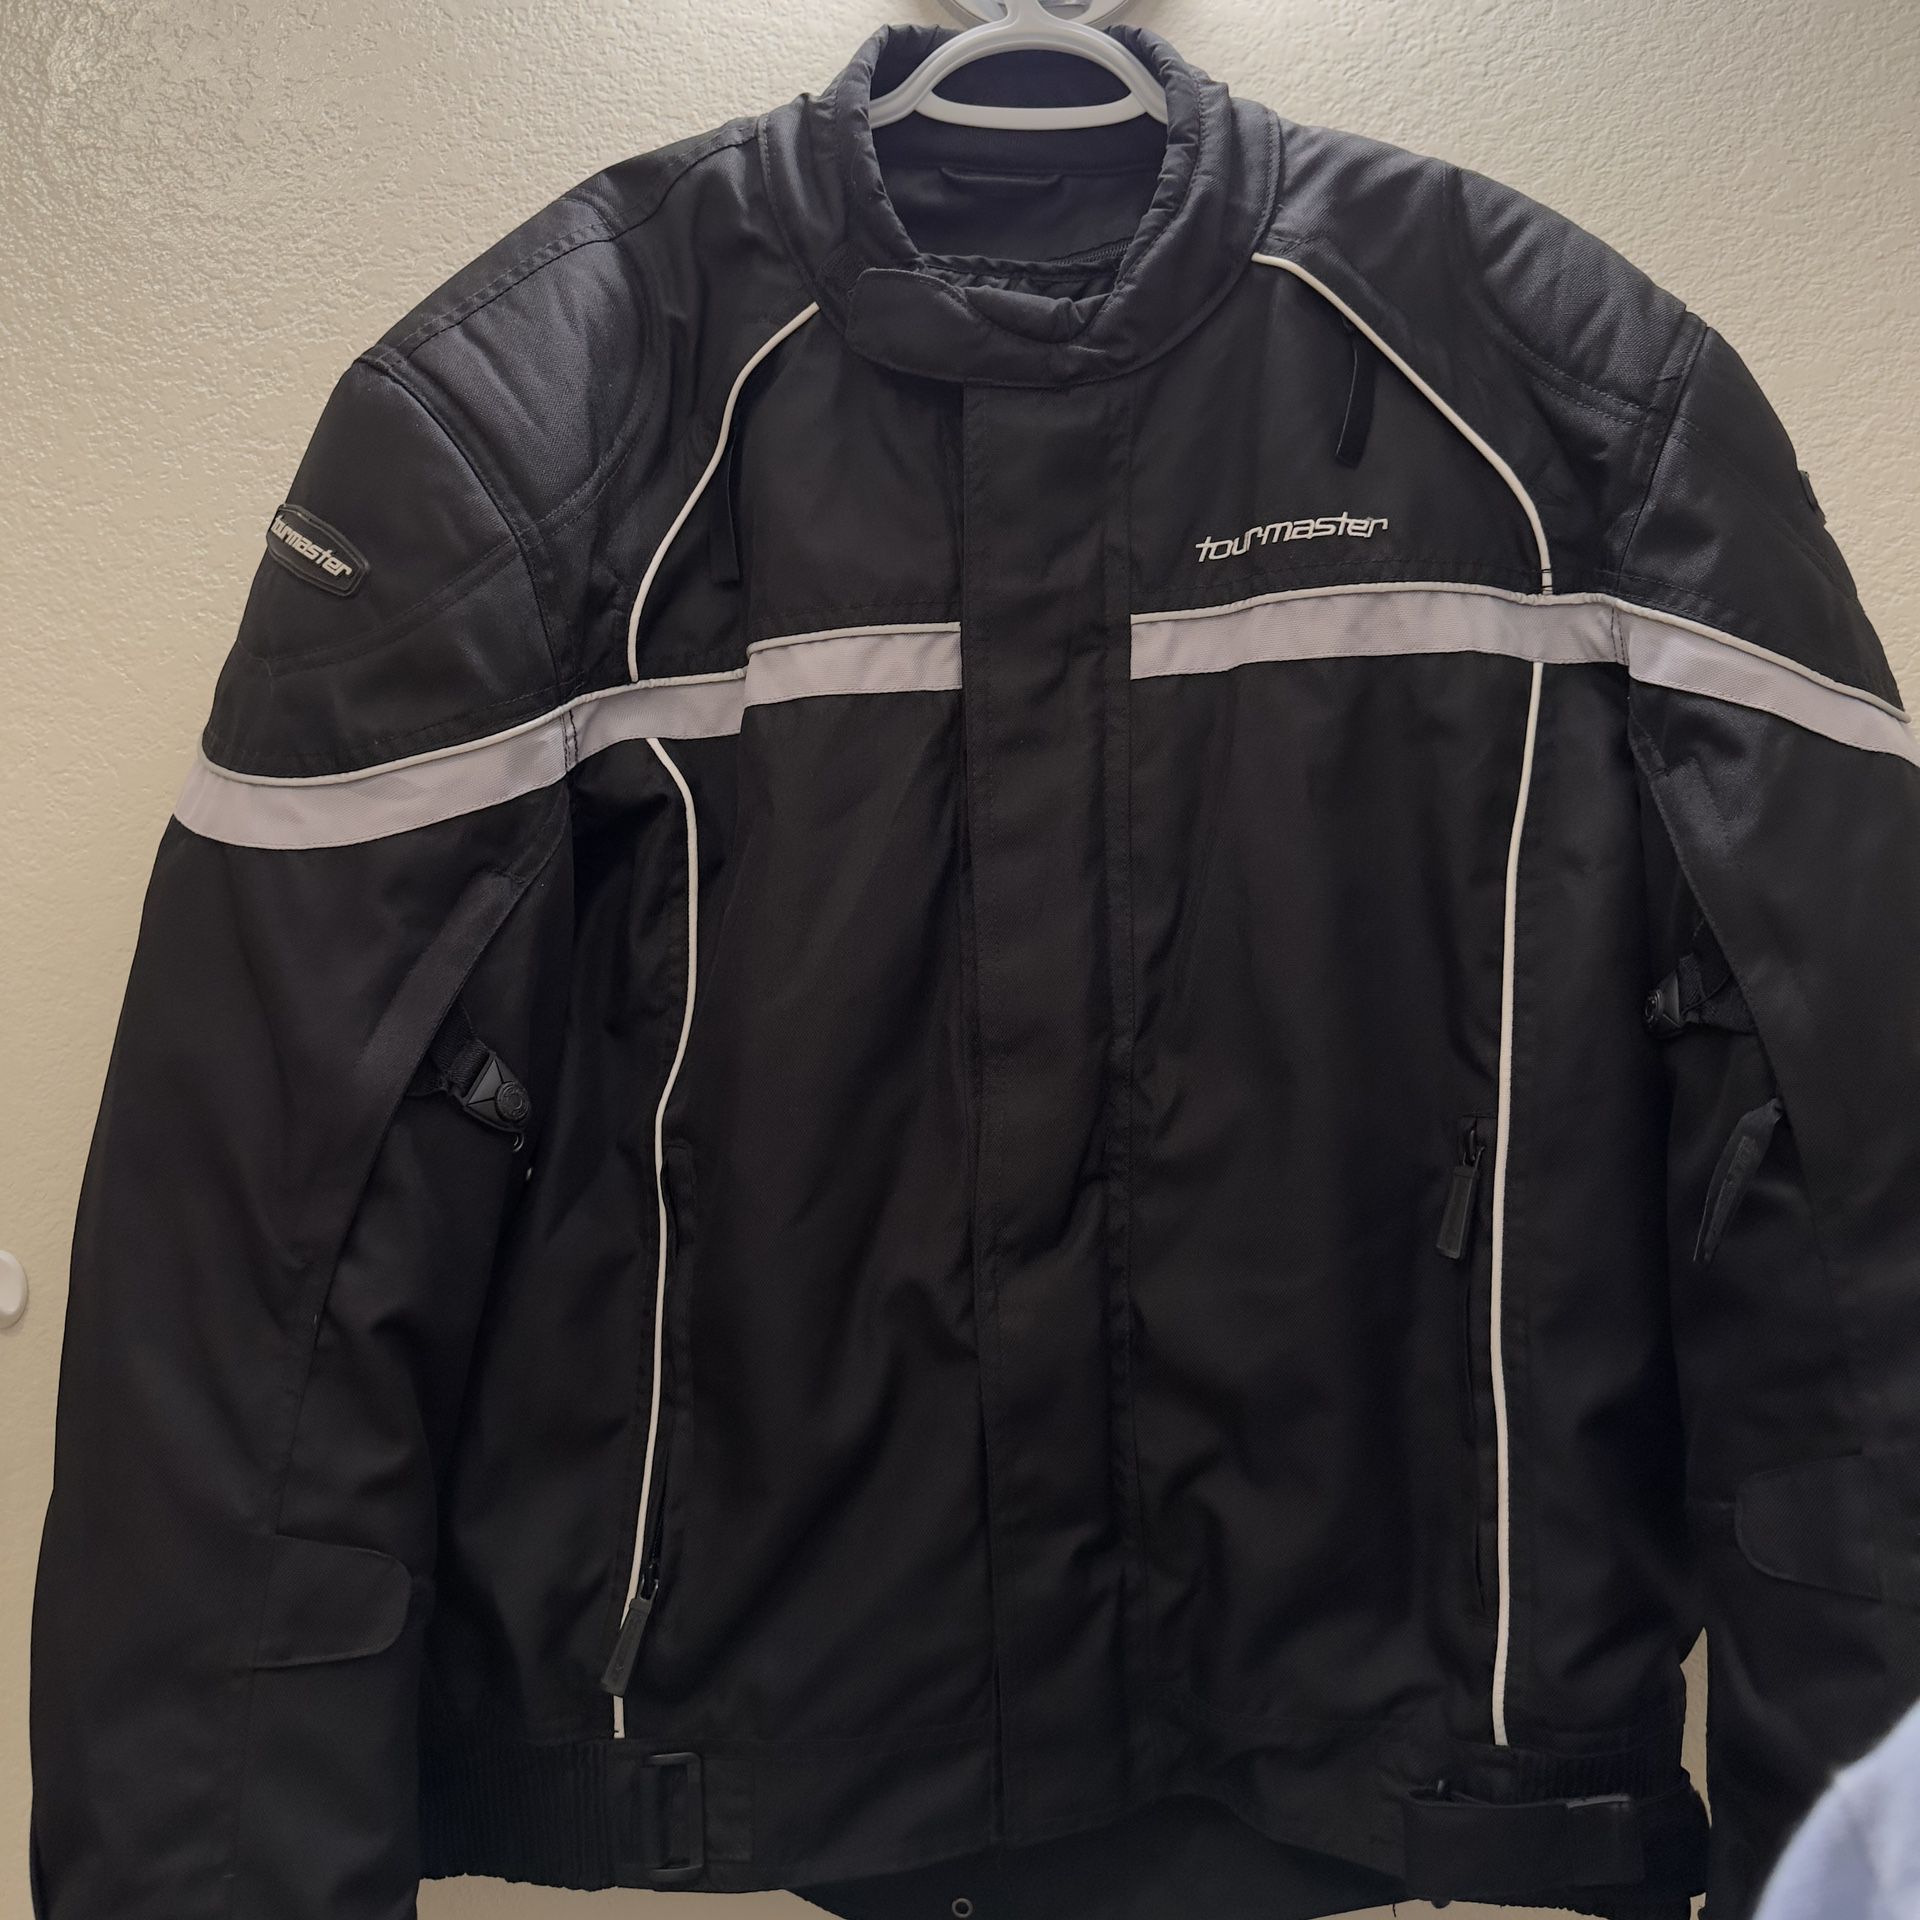 Tourmaster Jett Series 2 Jacket Size XL Mens for Sale in Fresno, CA ...